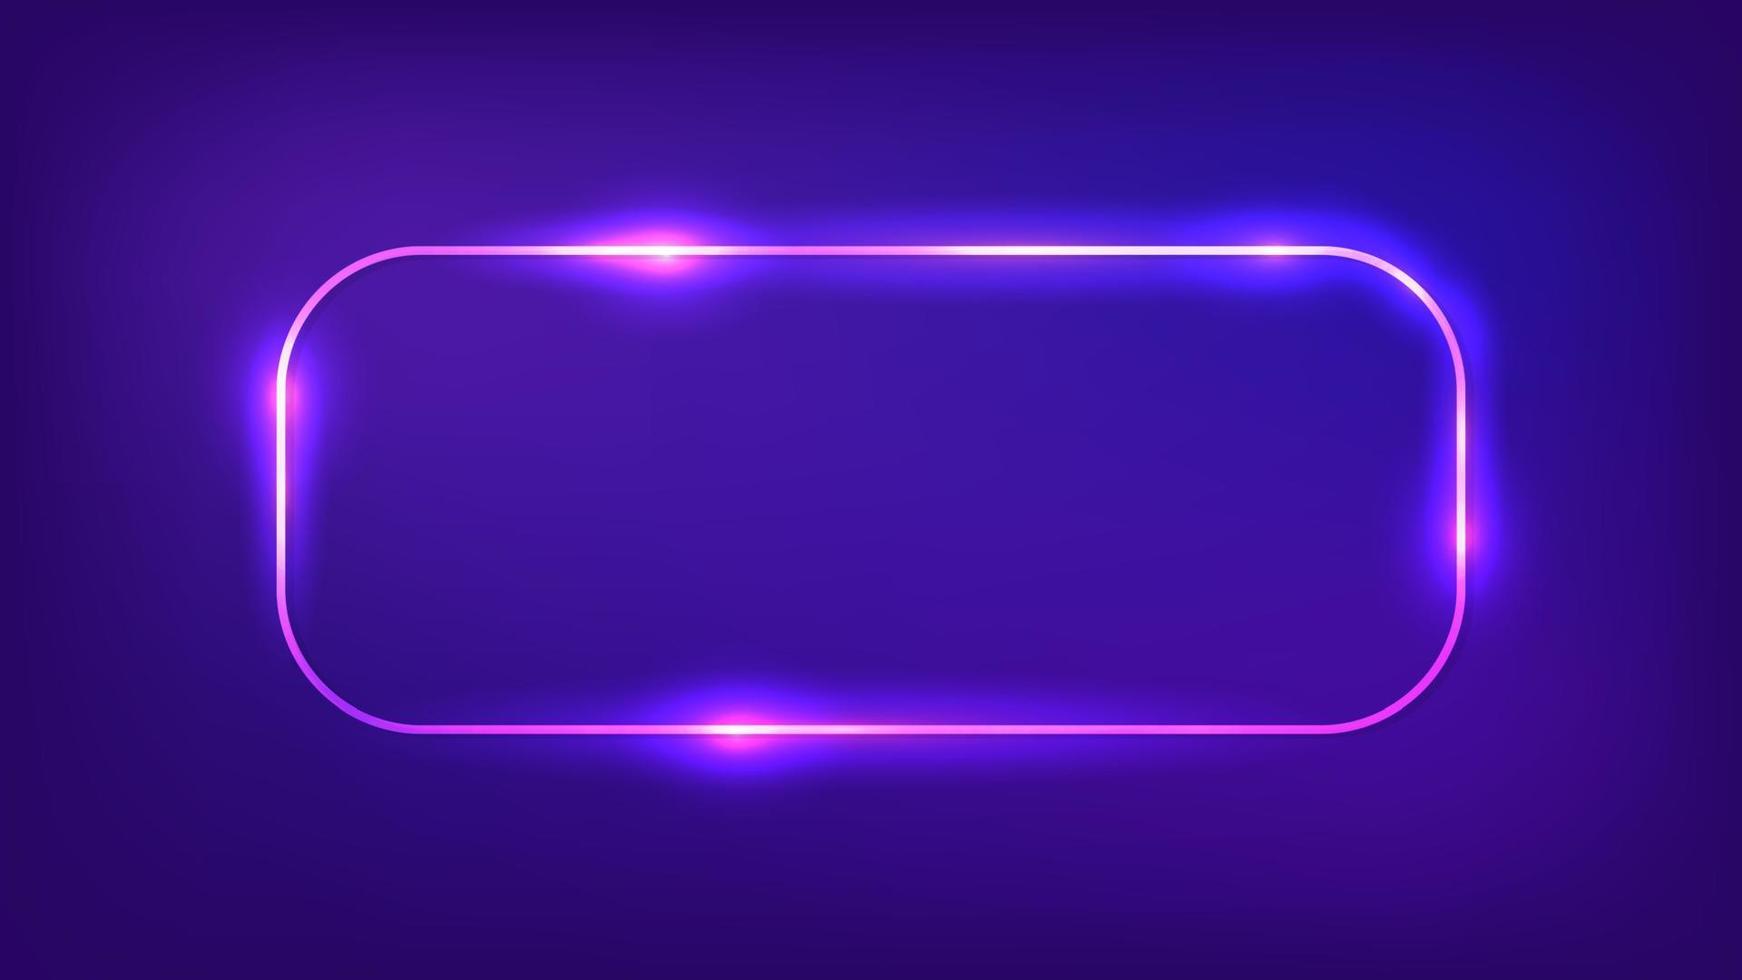 Neon rounded rectangular frame with shining effects on dark background. Empty glowing techno backdrop. Vector illustration.